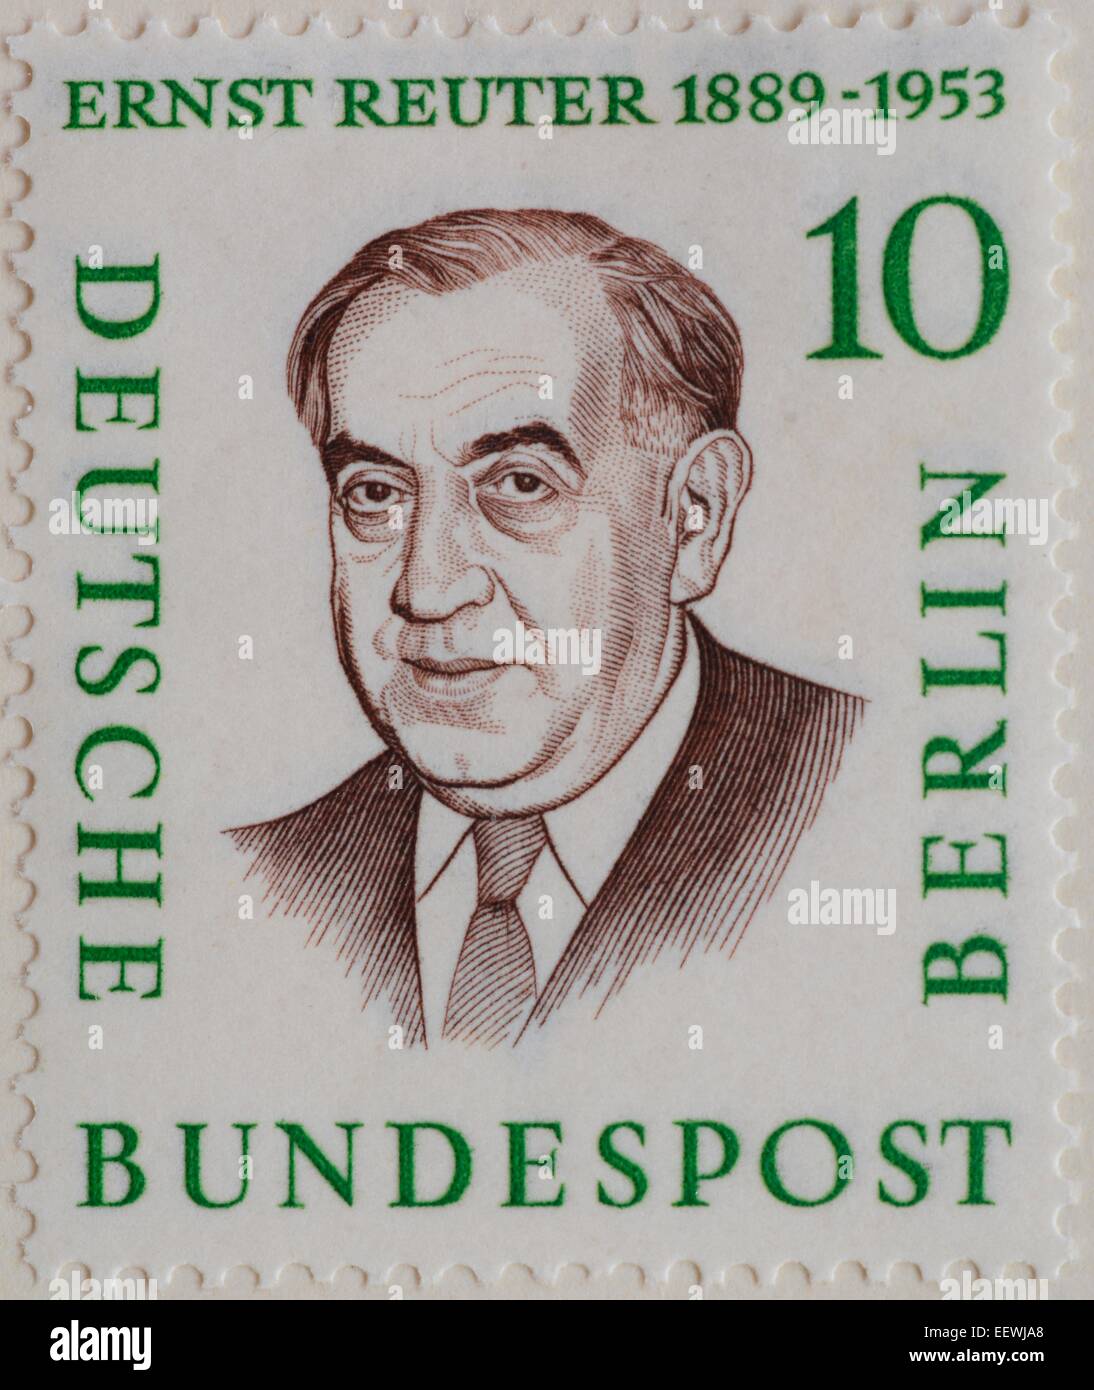 Ernst Reuter, mayor of West Berlin from 1948 to 1953, portrait on a German stamp, Berlin, 1958 Stock Photo